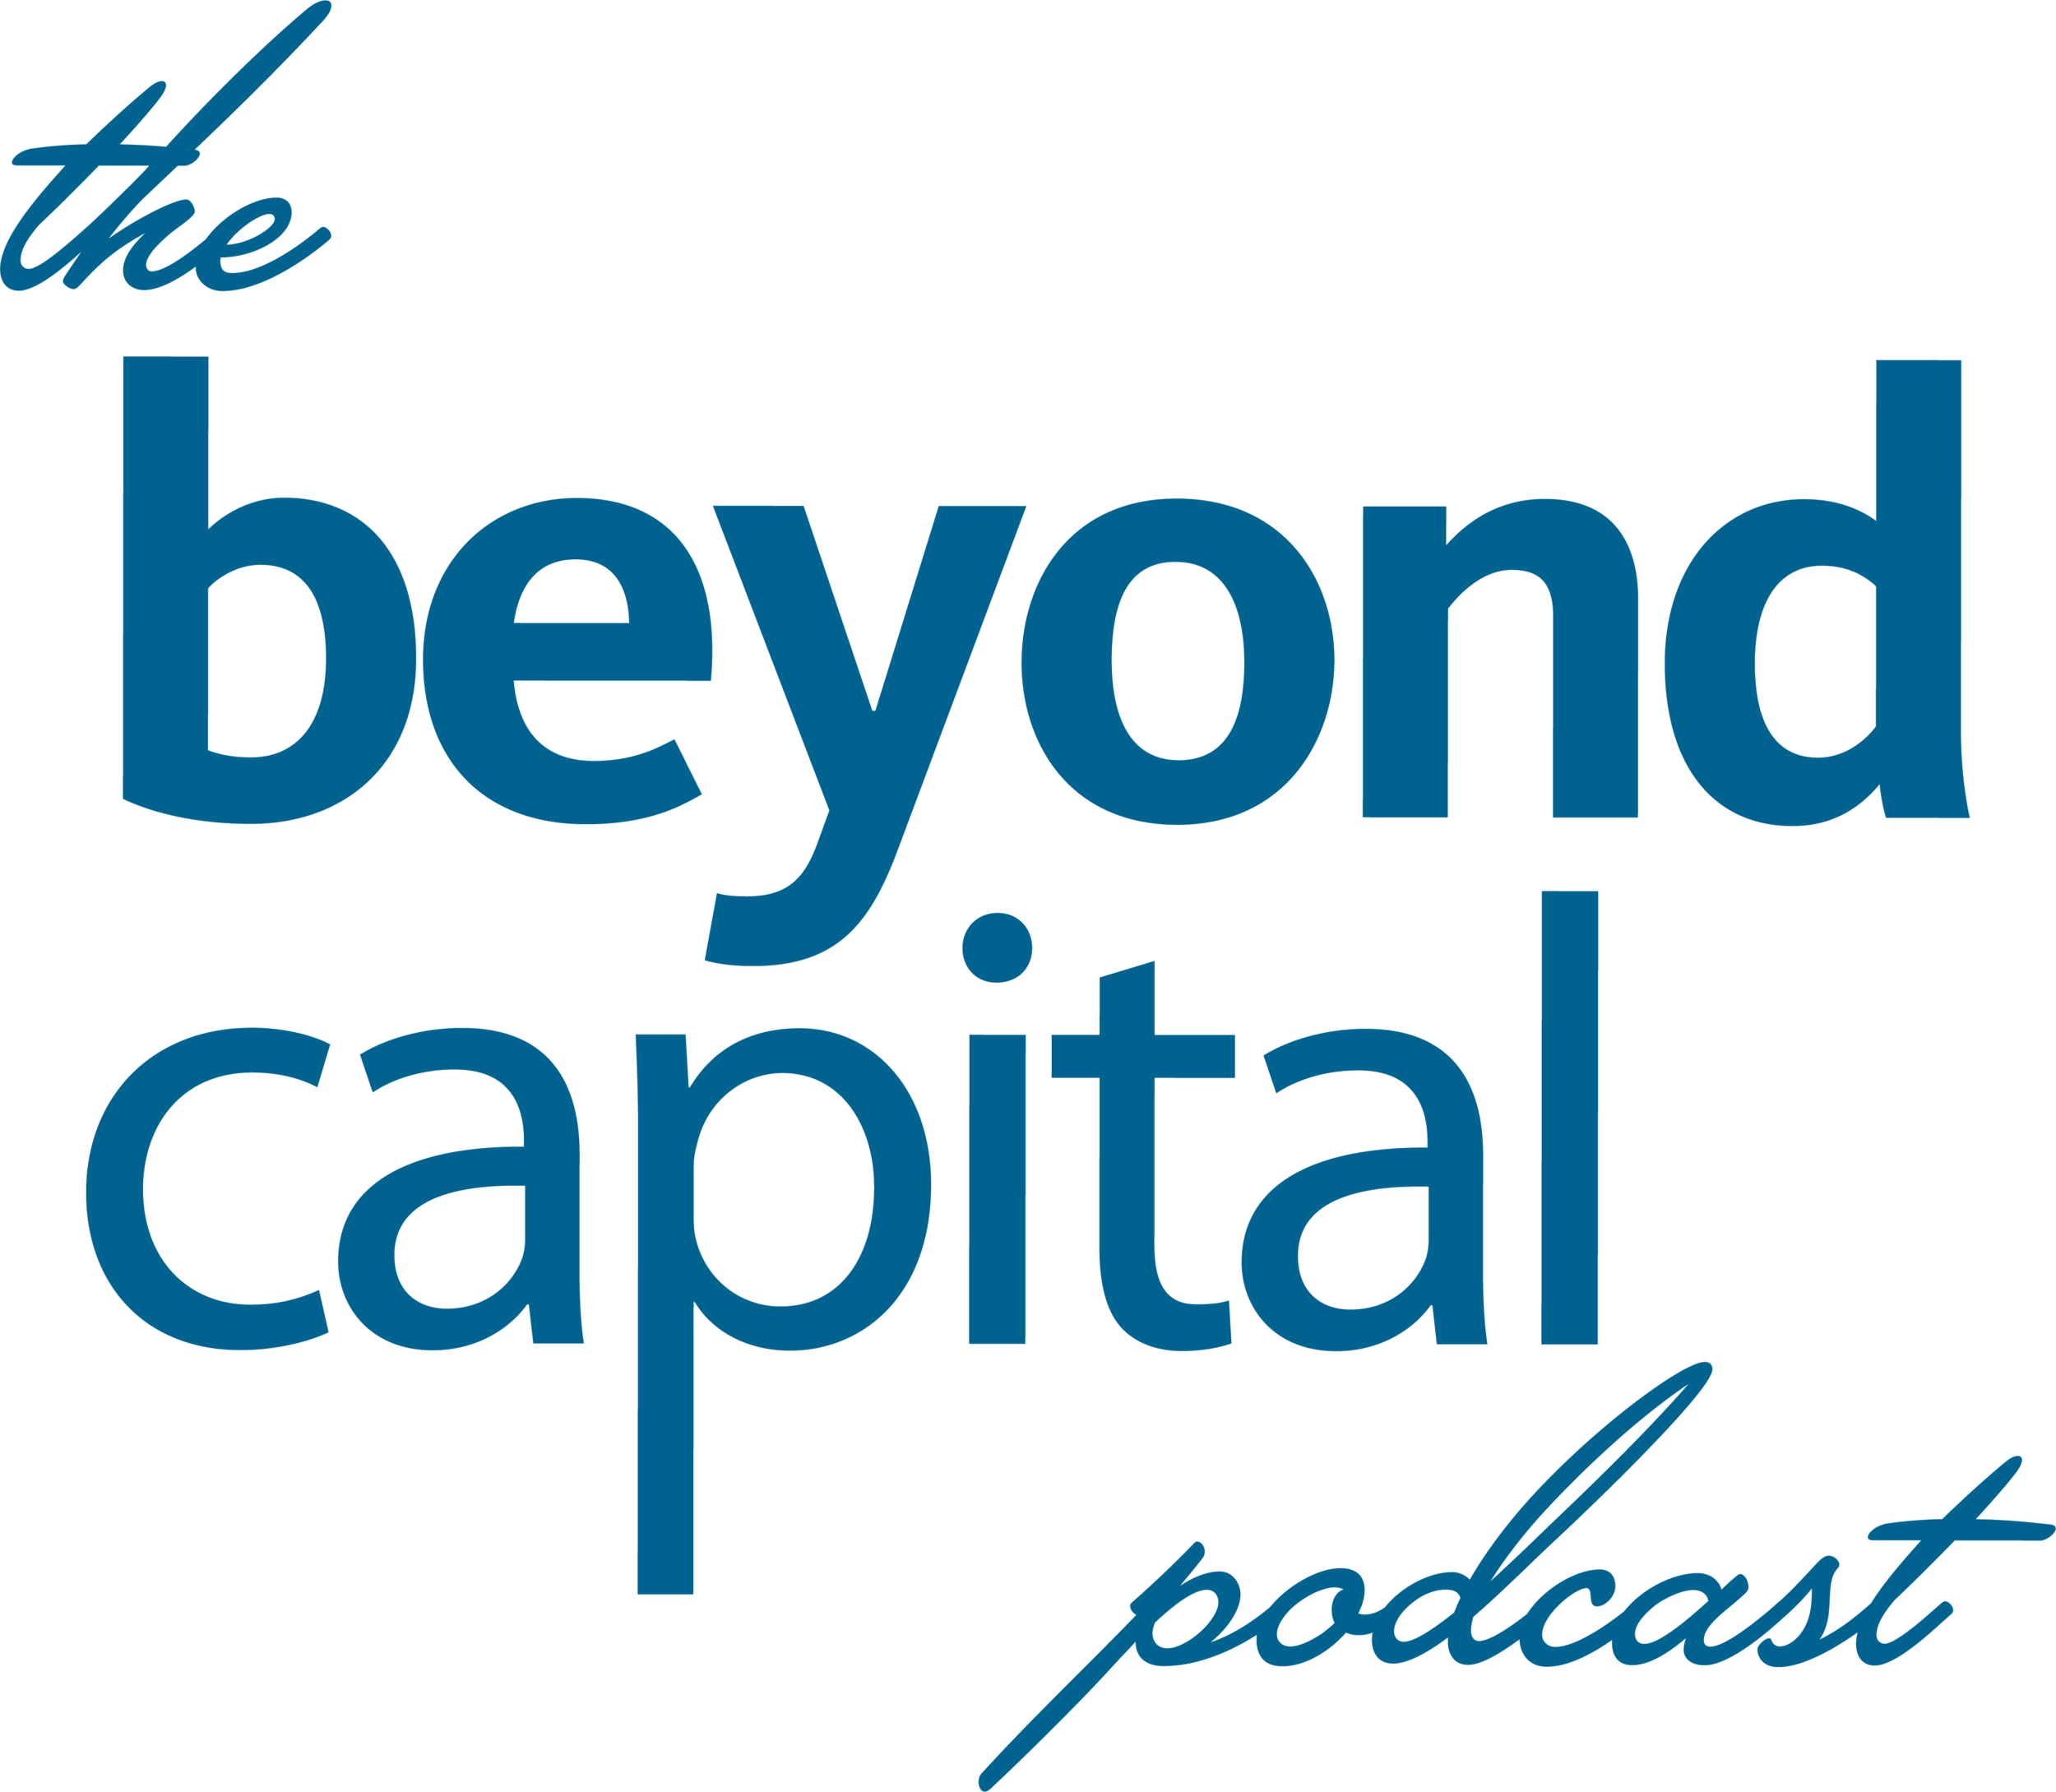 The Beyond Capital Podcast